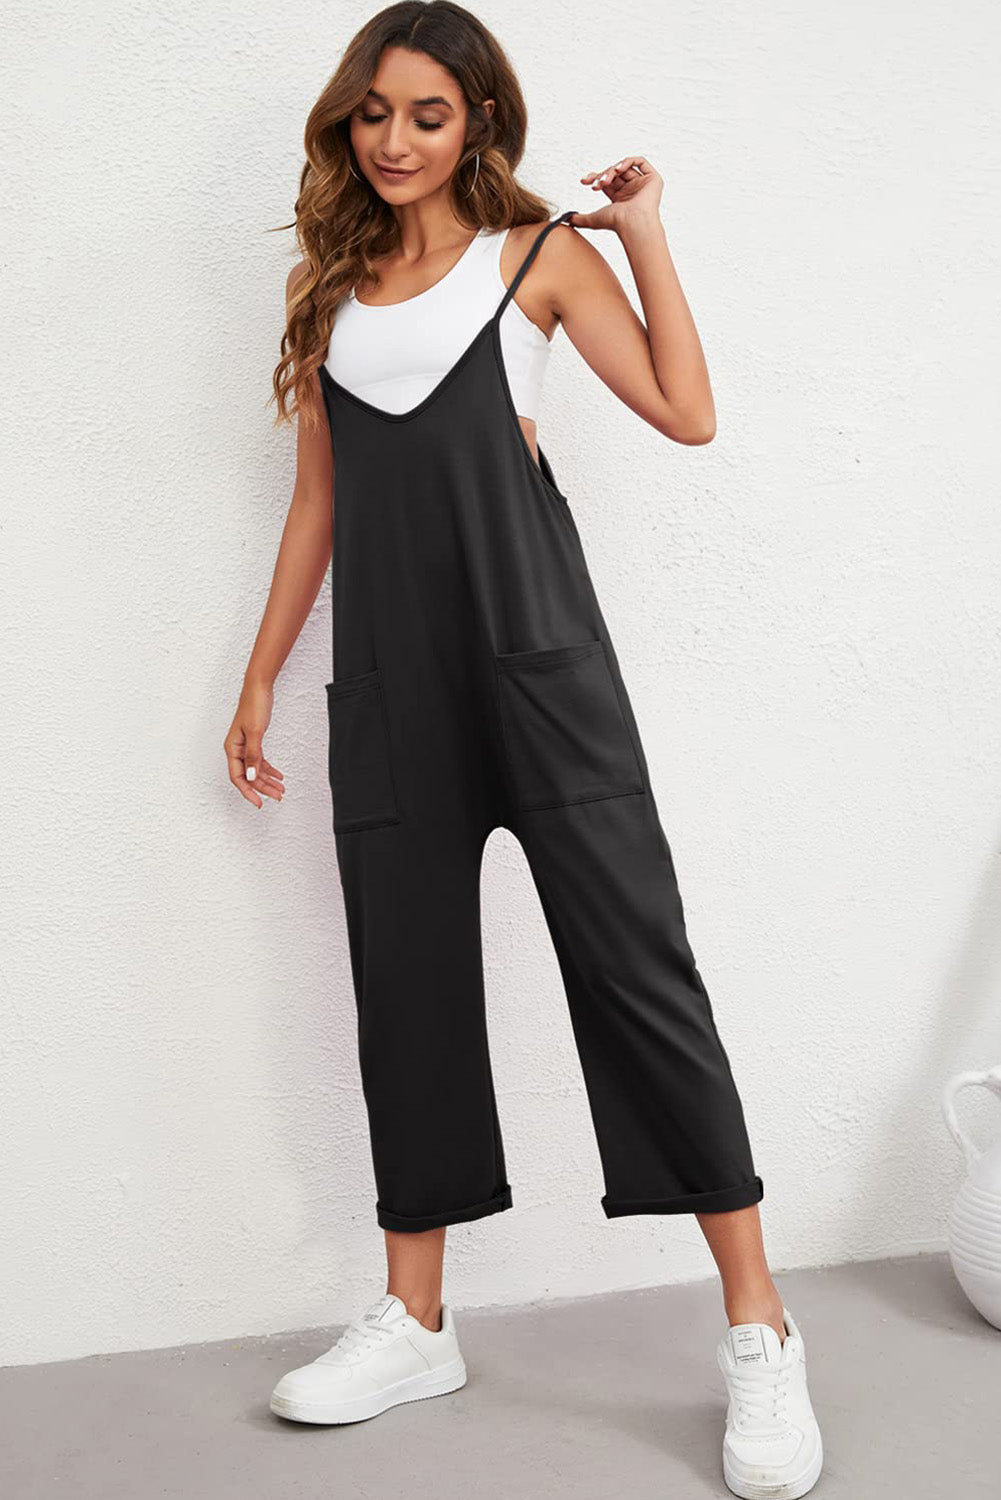 - Black Pocketed Adjustable Spaghetti Strap Straight Leg Jumpsuit - Jumpsuits & Rompers at TFC&H Co.